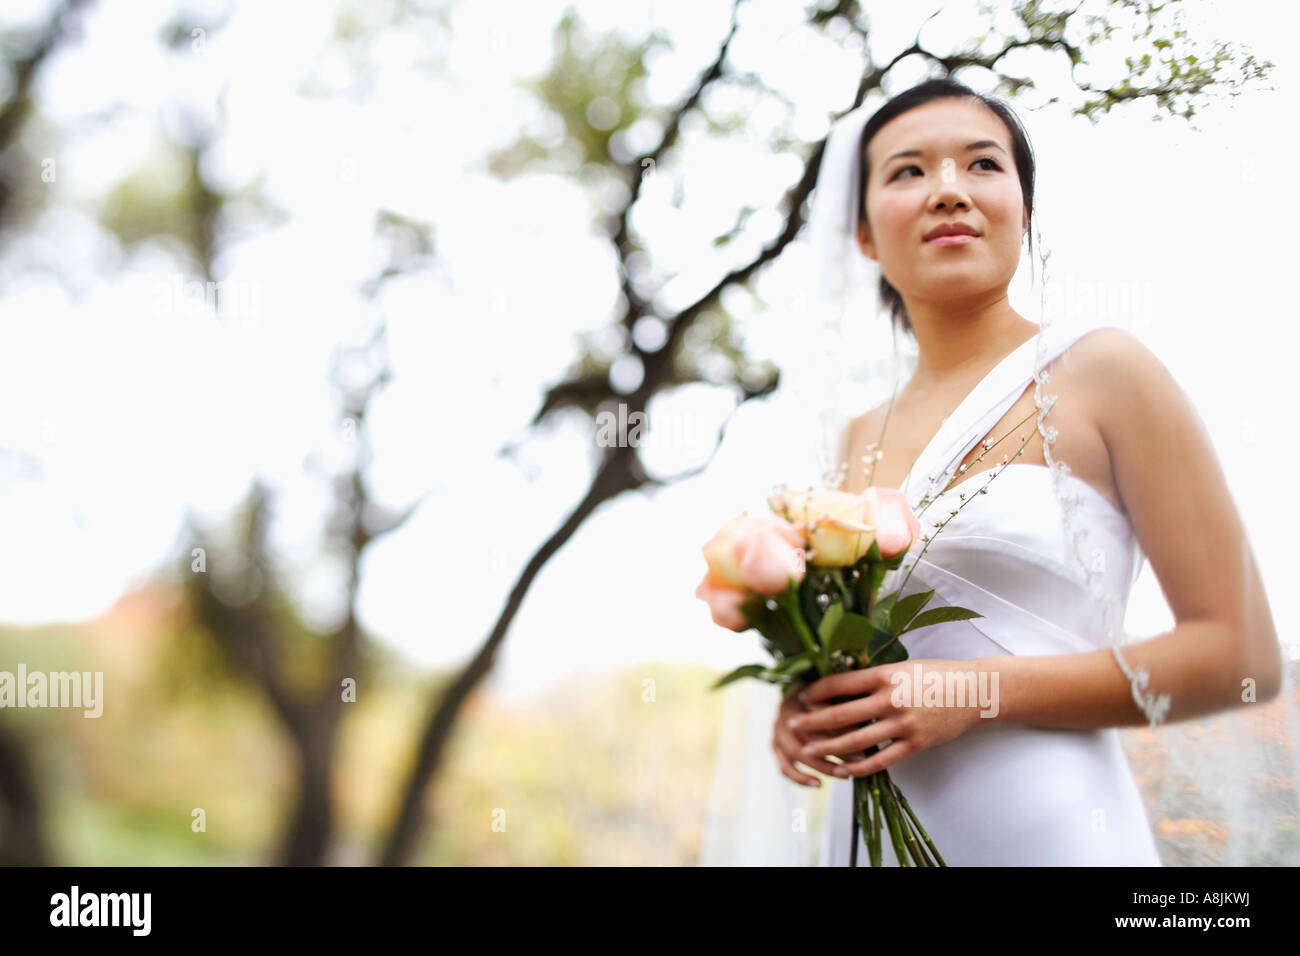 Low angle view of a bride holding a bouquet of flowers Stock Photo